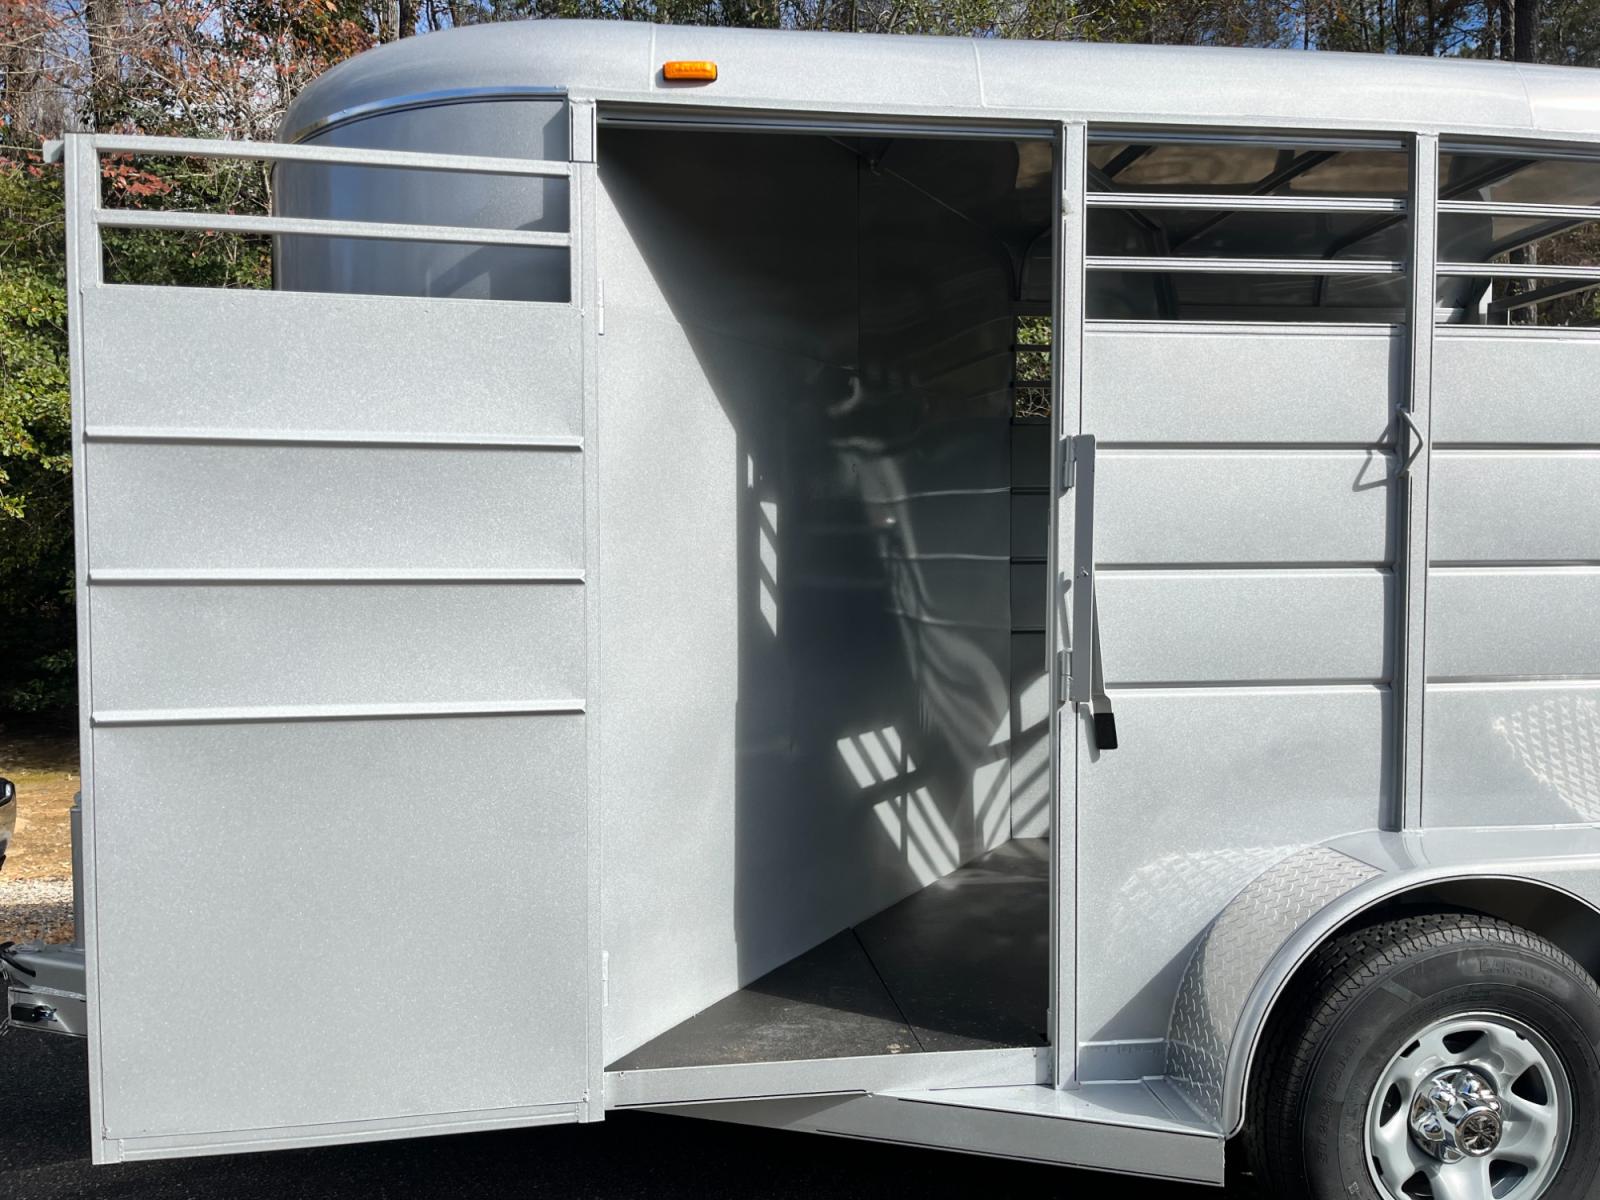 2023 Silver Metallic Calico 2 Horse Slant , located at 1330 Rainey Rd., Macon, 31220, (478) 960-1044, 32.845638, -83.778687 - Brand New 2023 Model 2 Horse Slant Calico Brand Trailer! 6ft Wide X 13ft Long Deluxe Model Tandem Axle Trailer! Easy Close Slant Divider Latch! 16" Radials! Beautiful Silver Metallic Paint is Awesome! Black Pin Striping Looks Fantastic! Fully Caulked Inside and Out to Prevent Rust! The Paint i - Photo #22